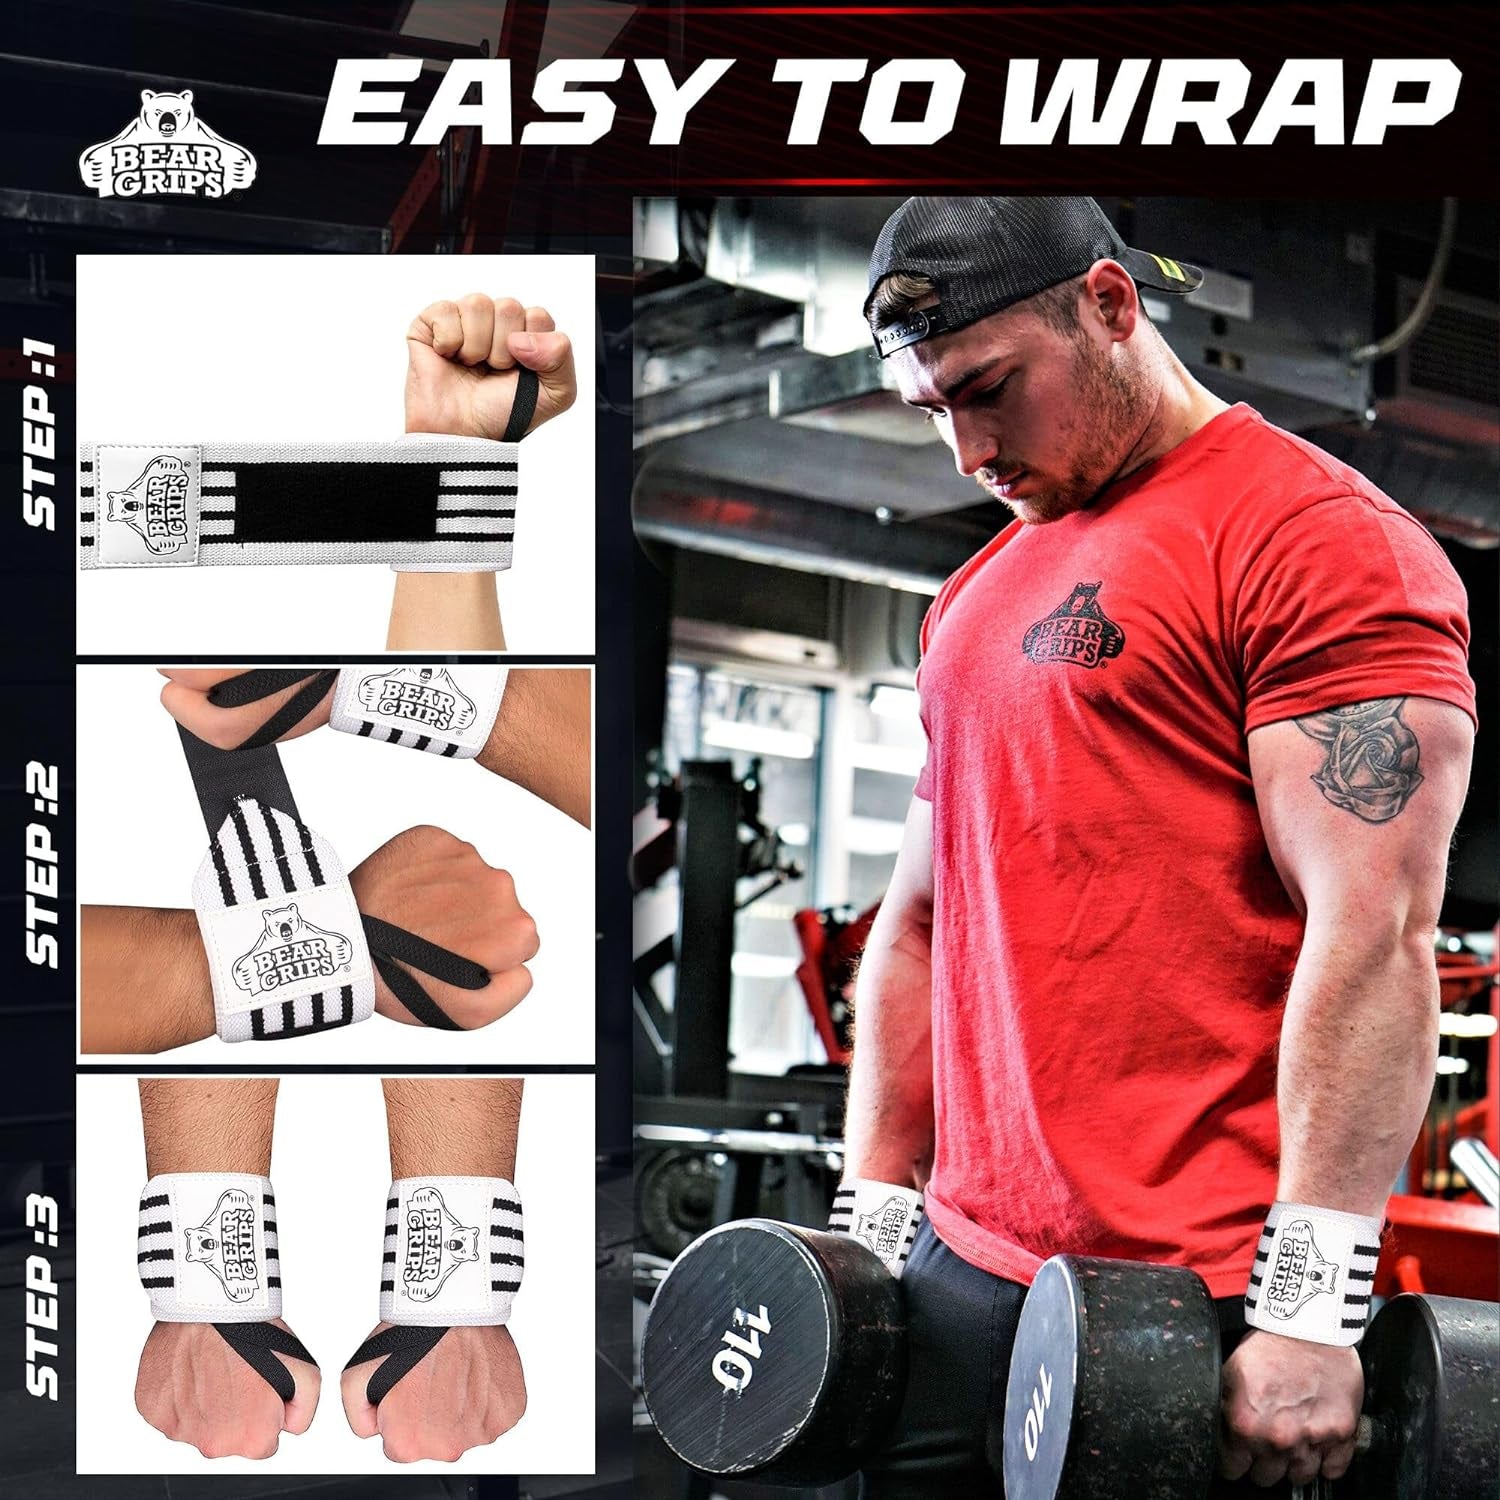 Wrist Wraps for Weightlifting | Weight Lifting Wrist Straps for Weightlifting | Extra Strength Gym Wrist Wraps | Two Wrist Wrap per Pack | 12” & 18” | Lifting Wrist Wraps for Men & Women